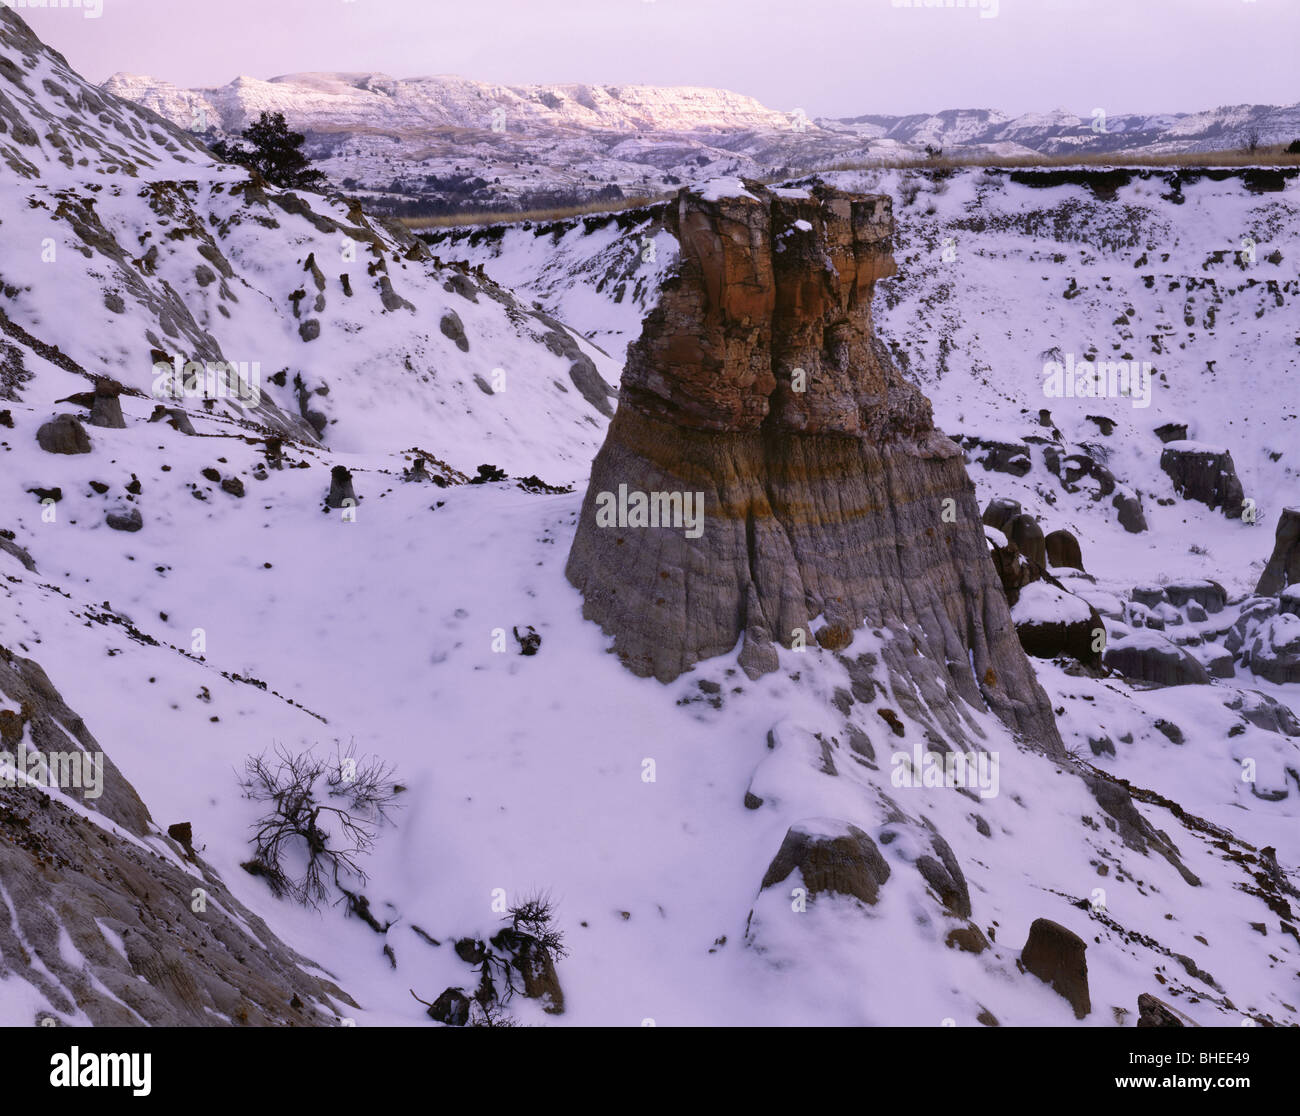 NORTH DAKOTA - Sunset over a snow-covered Theodore Roosevelt National Park. Stock Photo